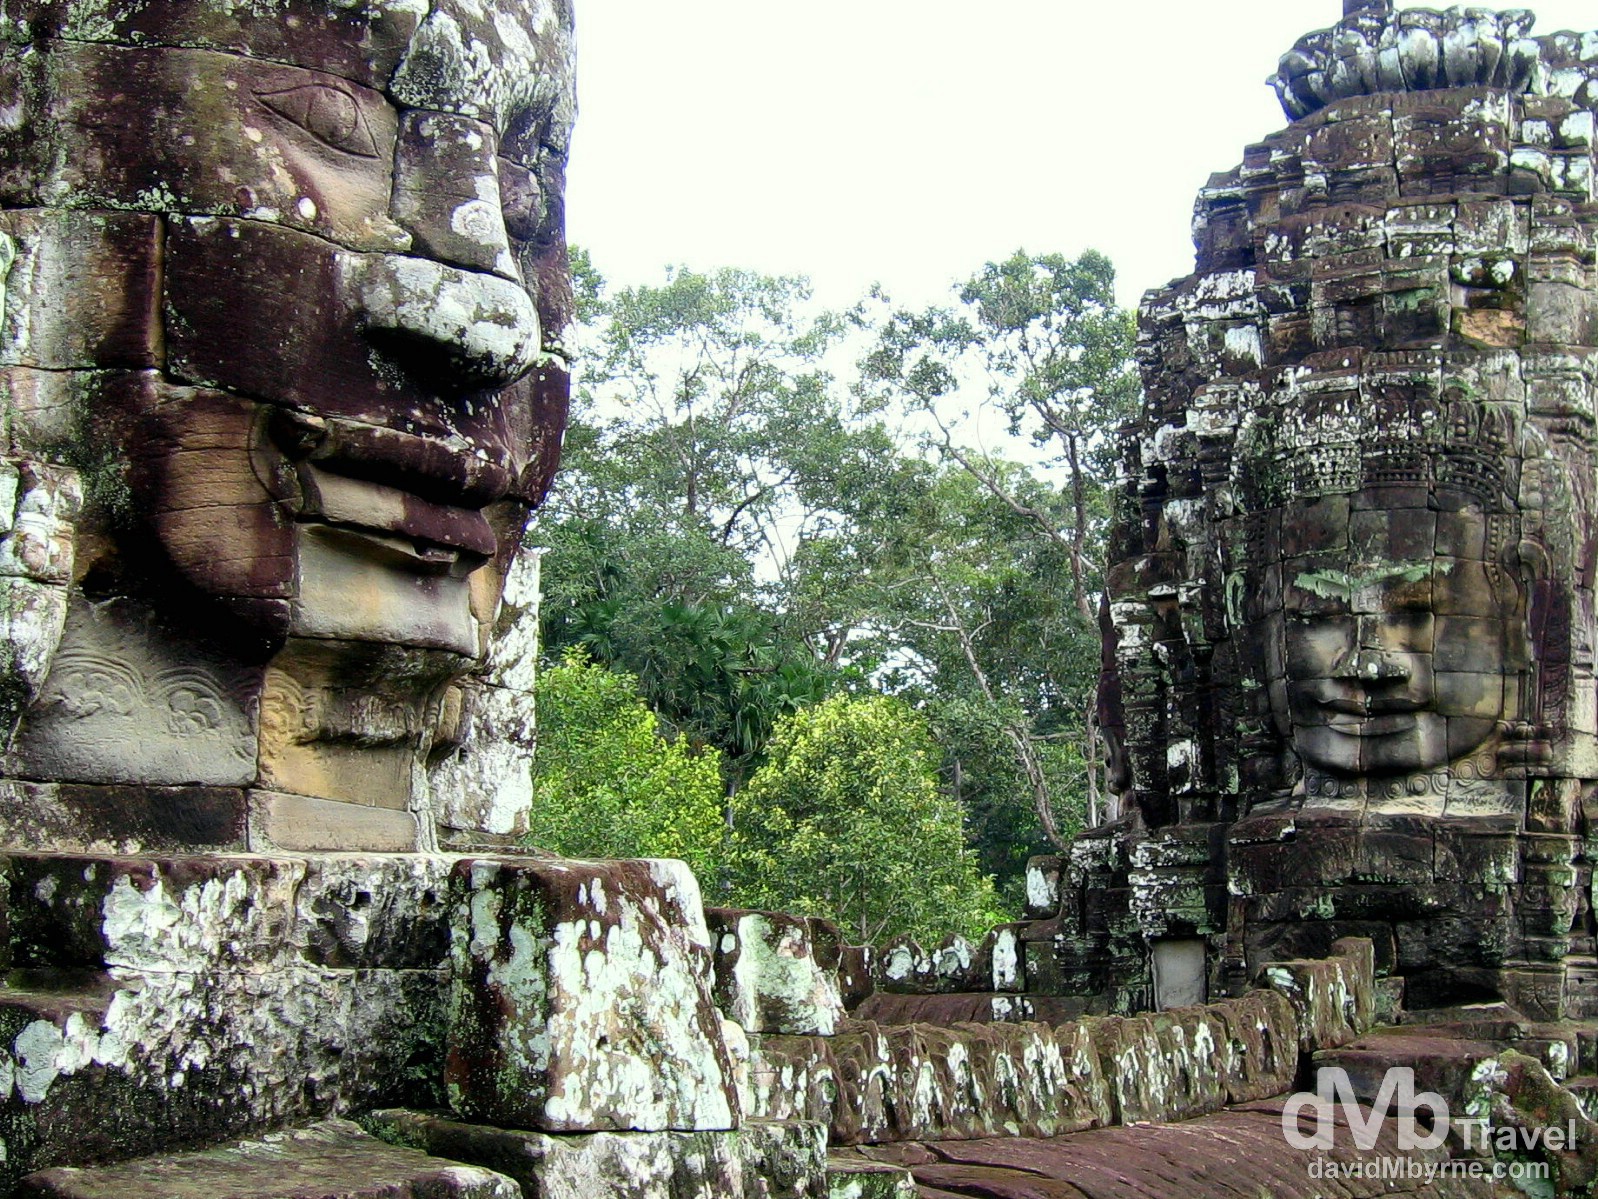 The faces of the temple Bayon in Angkor Thom, Angkor, Cambodia. September 20th, 2005.